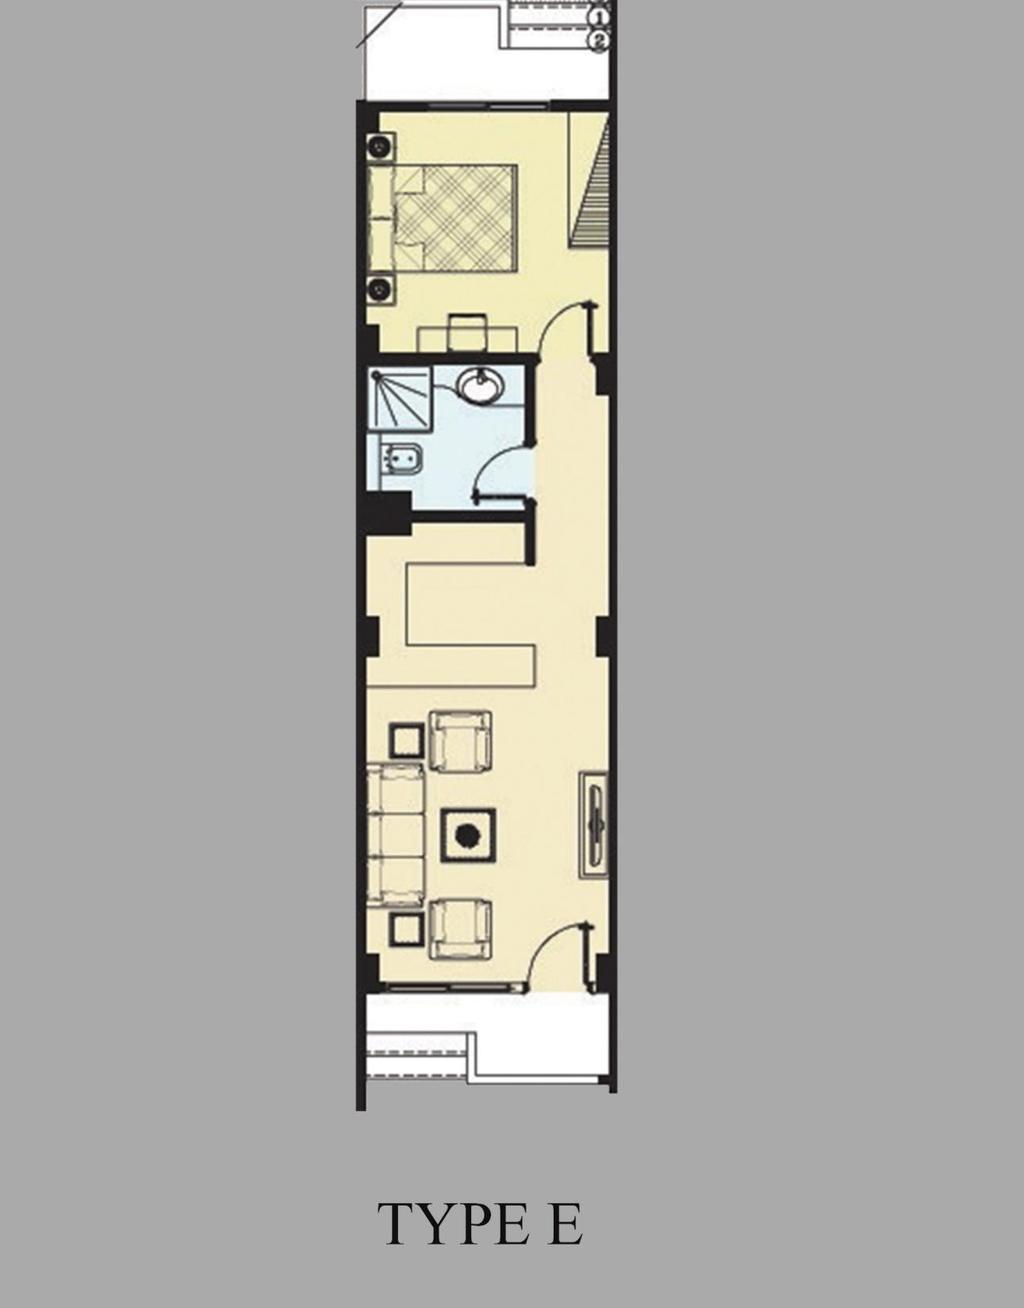 Type E One bed room apartment Unit Size: 70 sqm Price Starts at 840,000 EGP